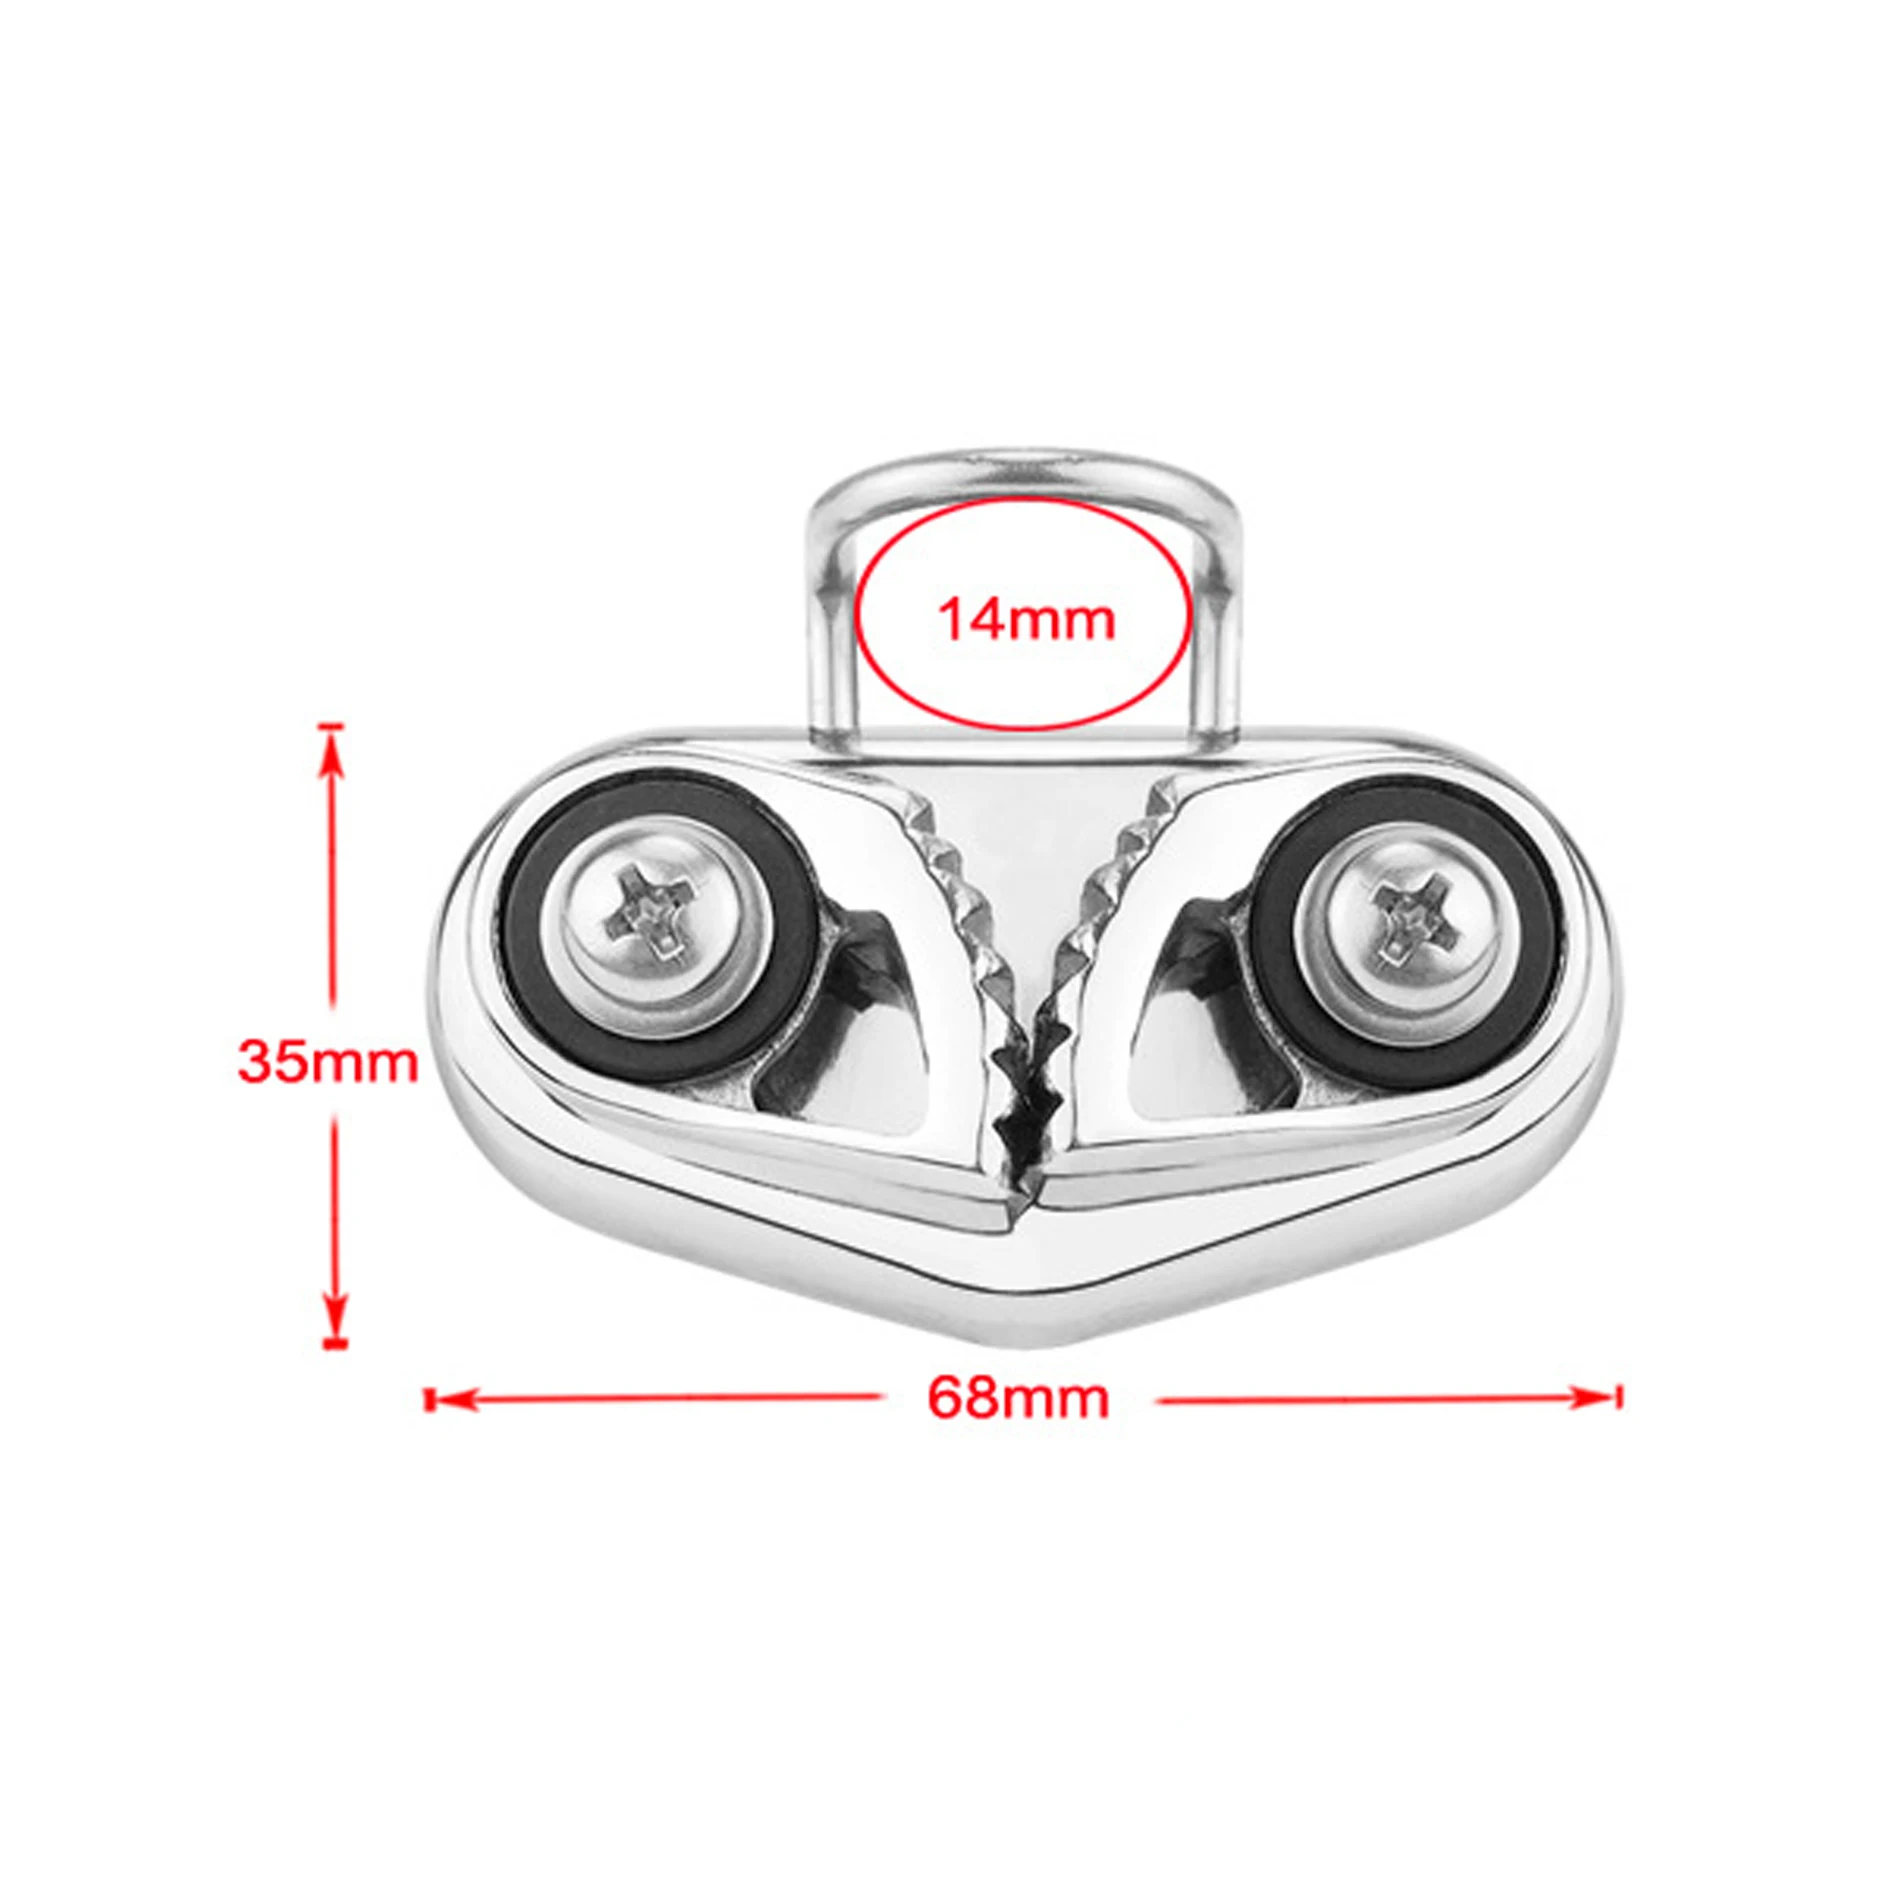 Stainless Steel 316 Cam Cleat with Wire Leading Ring Boat Cam Cleats Matic Fairlead Marine Sailing Sailboat Kayak Canoe Dinghy enlarge